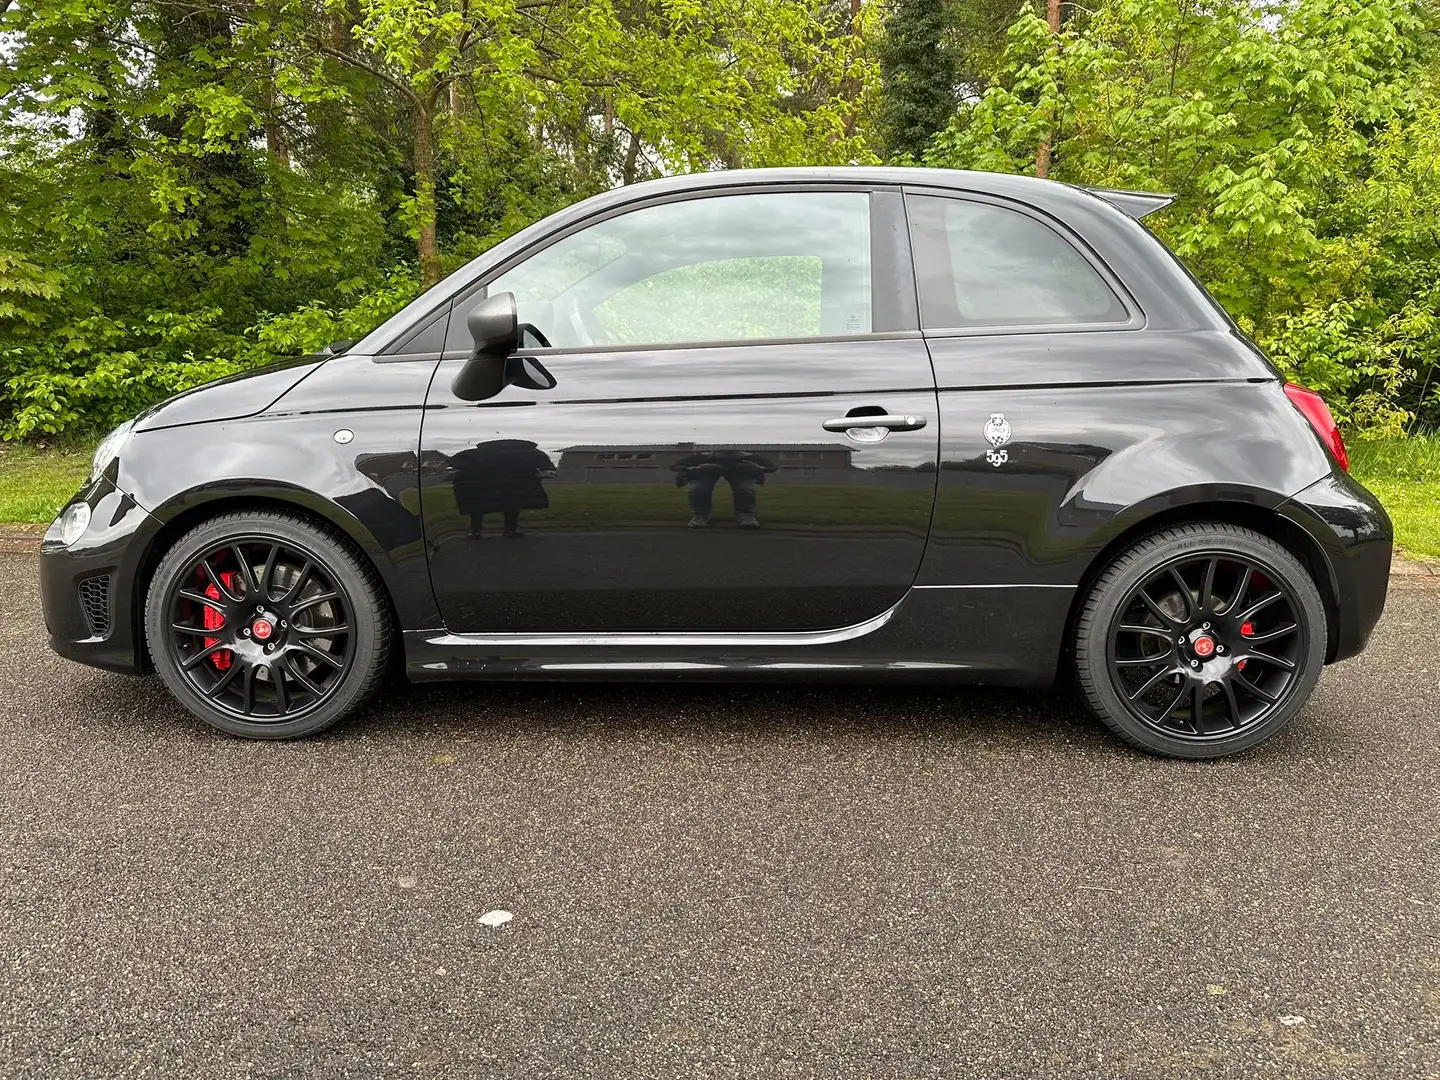 Abarth 595 Competizione 1.4 T-JET Abarth Corsa By Sabelt Carbon Leder Siyah - 2